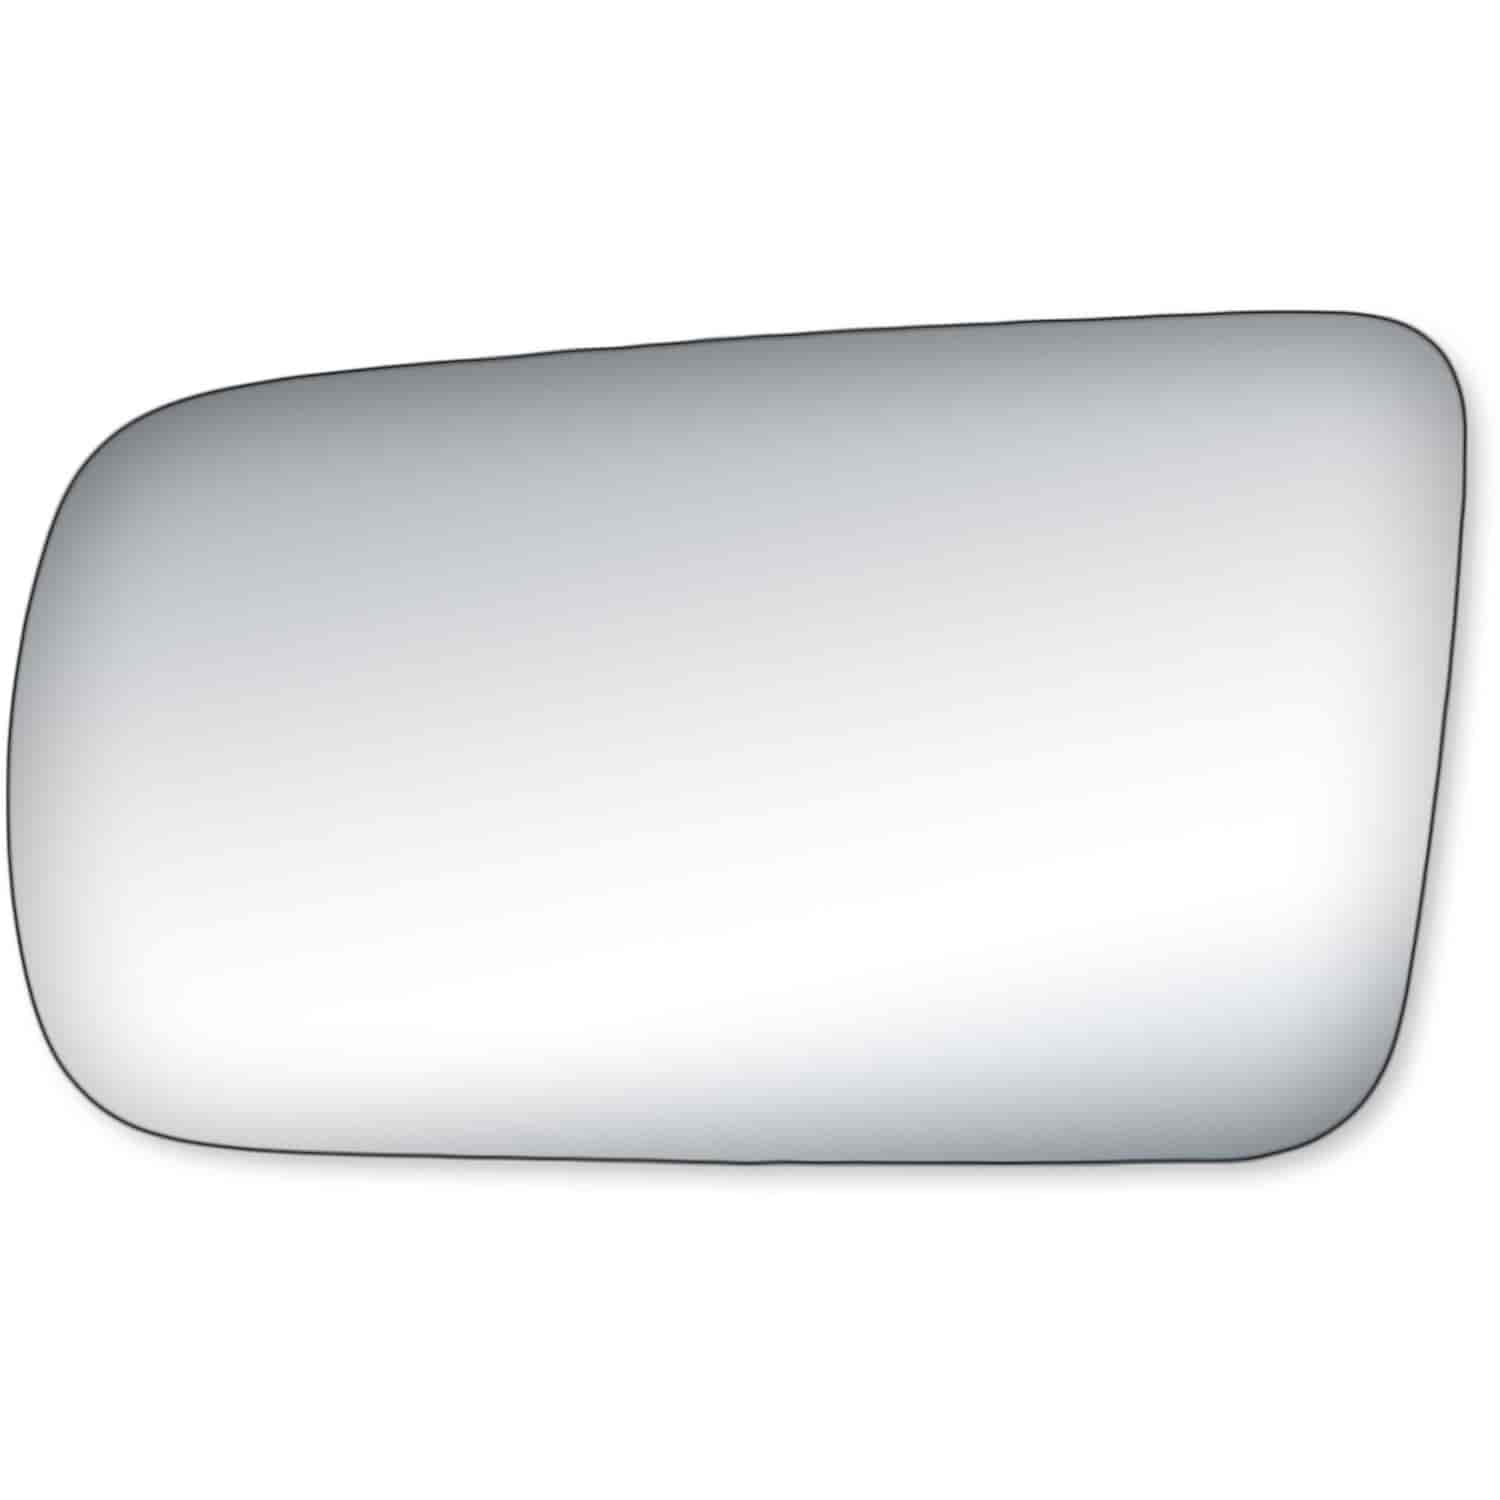 Replacement Glass for 87-91 Camry Sedan foldaway the glass measures 3 7/16 tall by 5 15/16 wide and